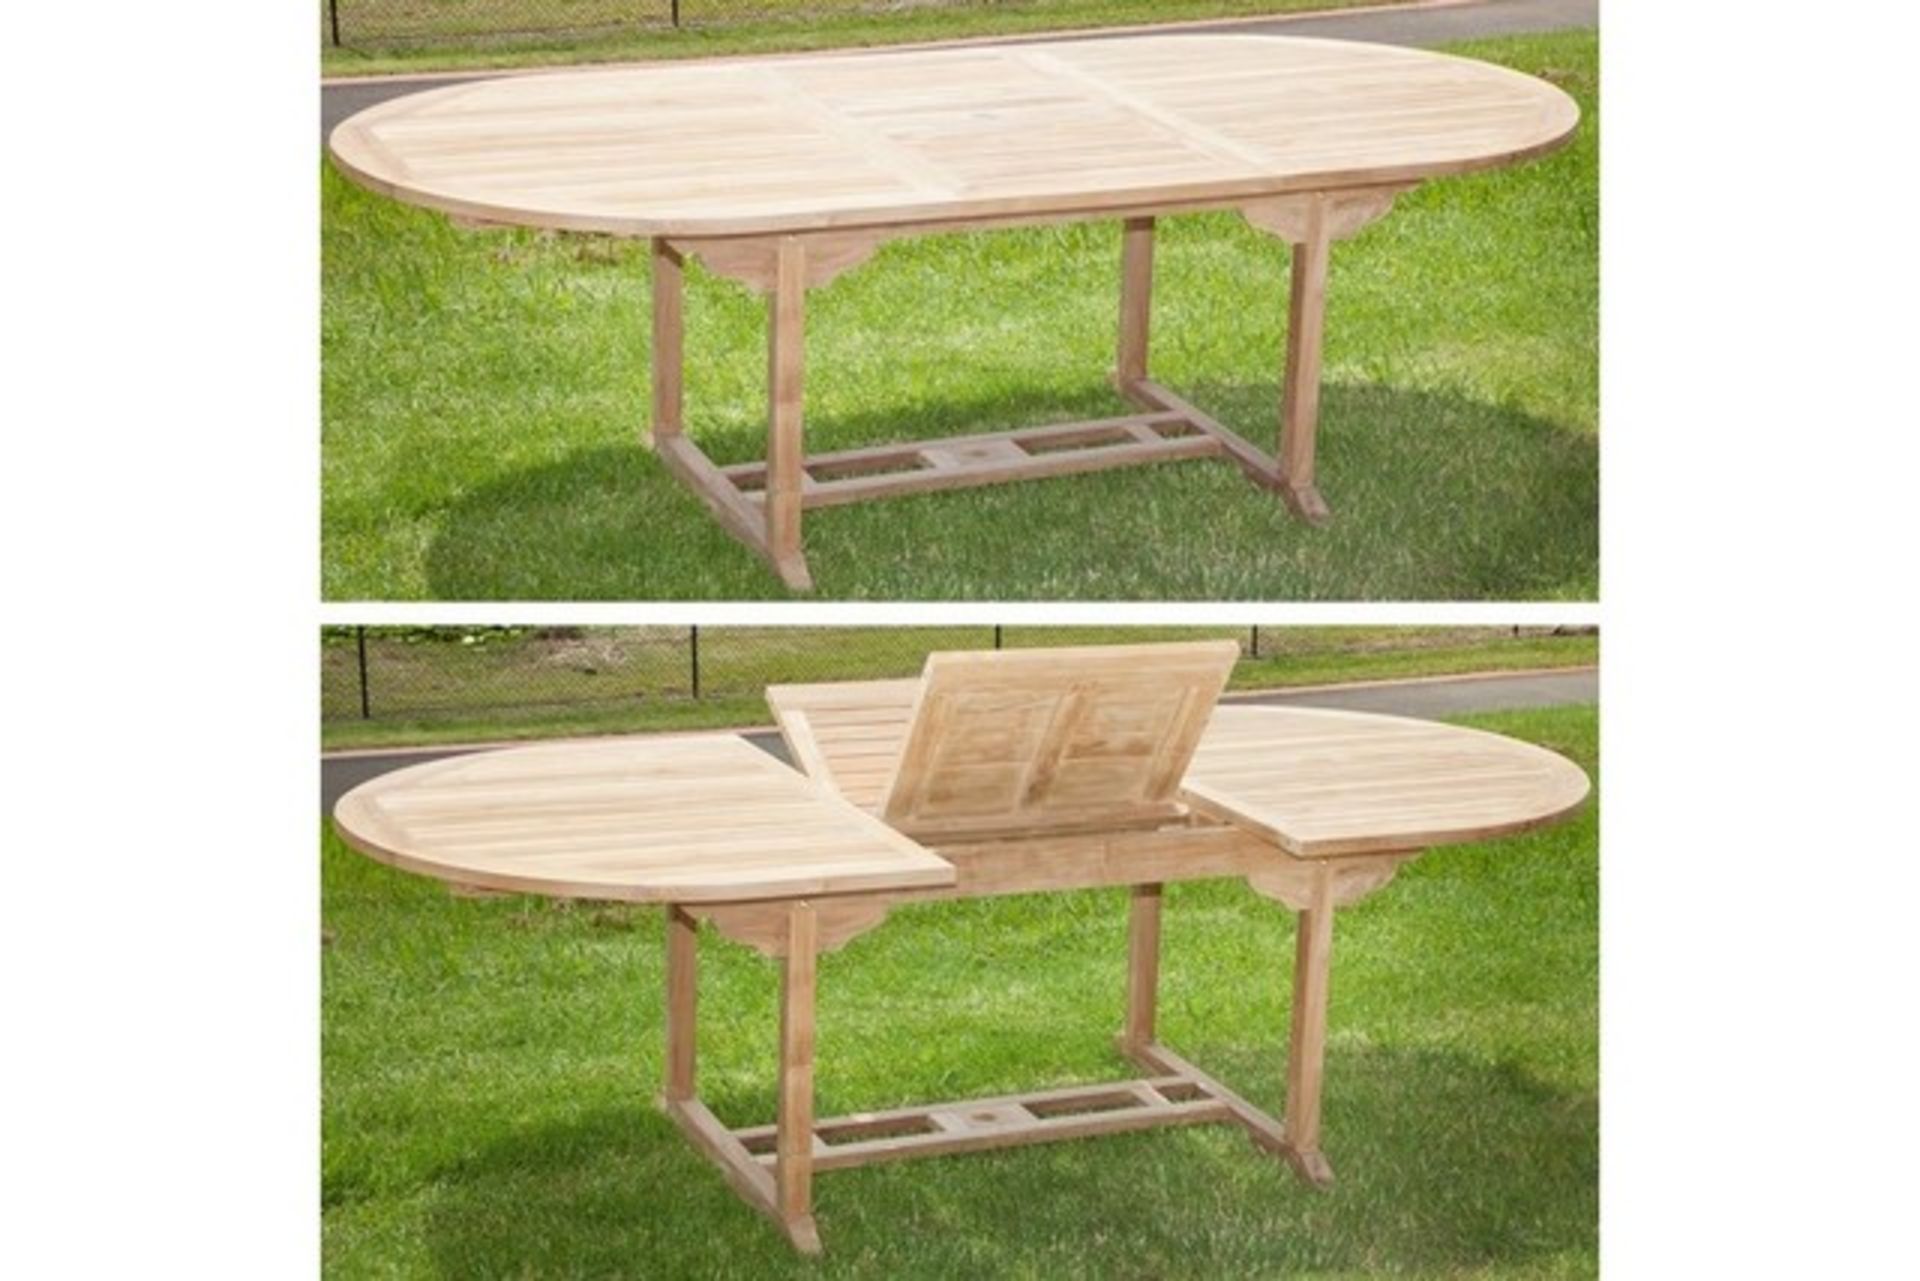 V Brand New Teak Extended Oval Table Set Allows For Up To 6 People including 6 stacking chairs / - Image 2 of 2